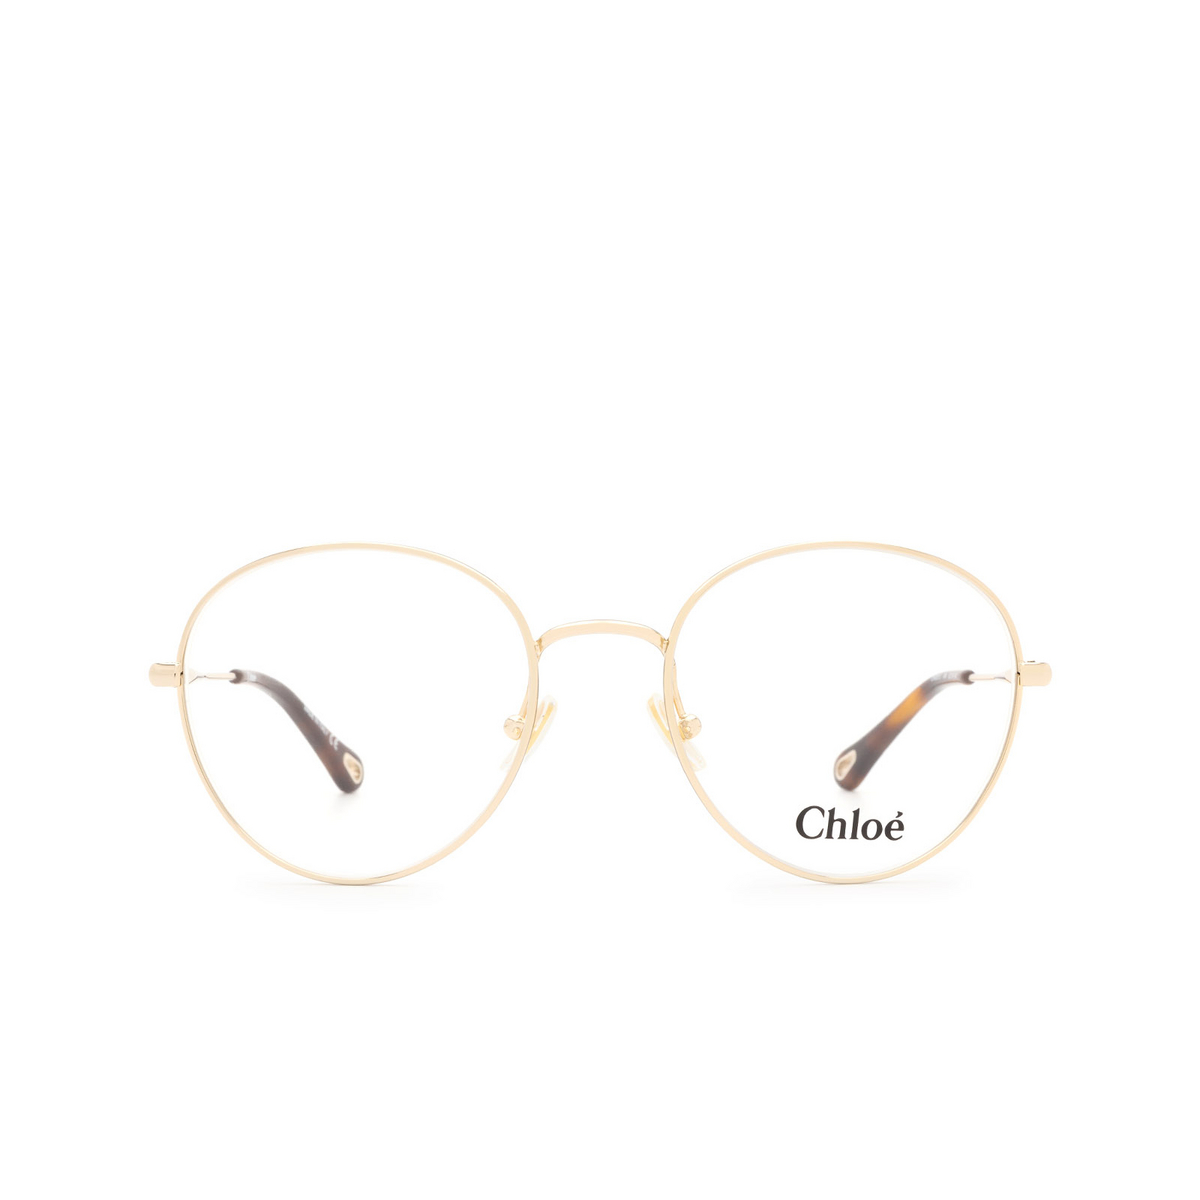 Chloé® Round Eyeglasses: CH0021O color Gold 004 - front view.